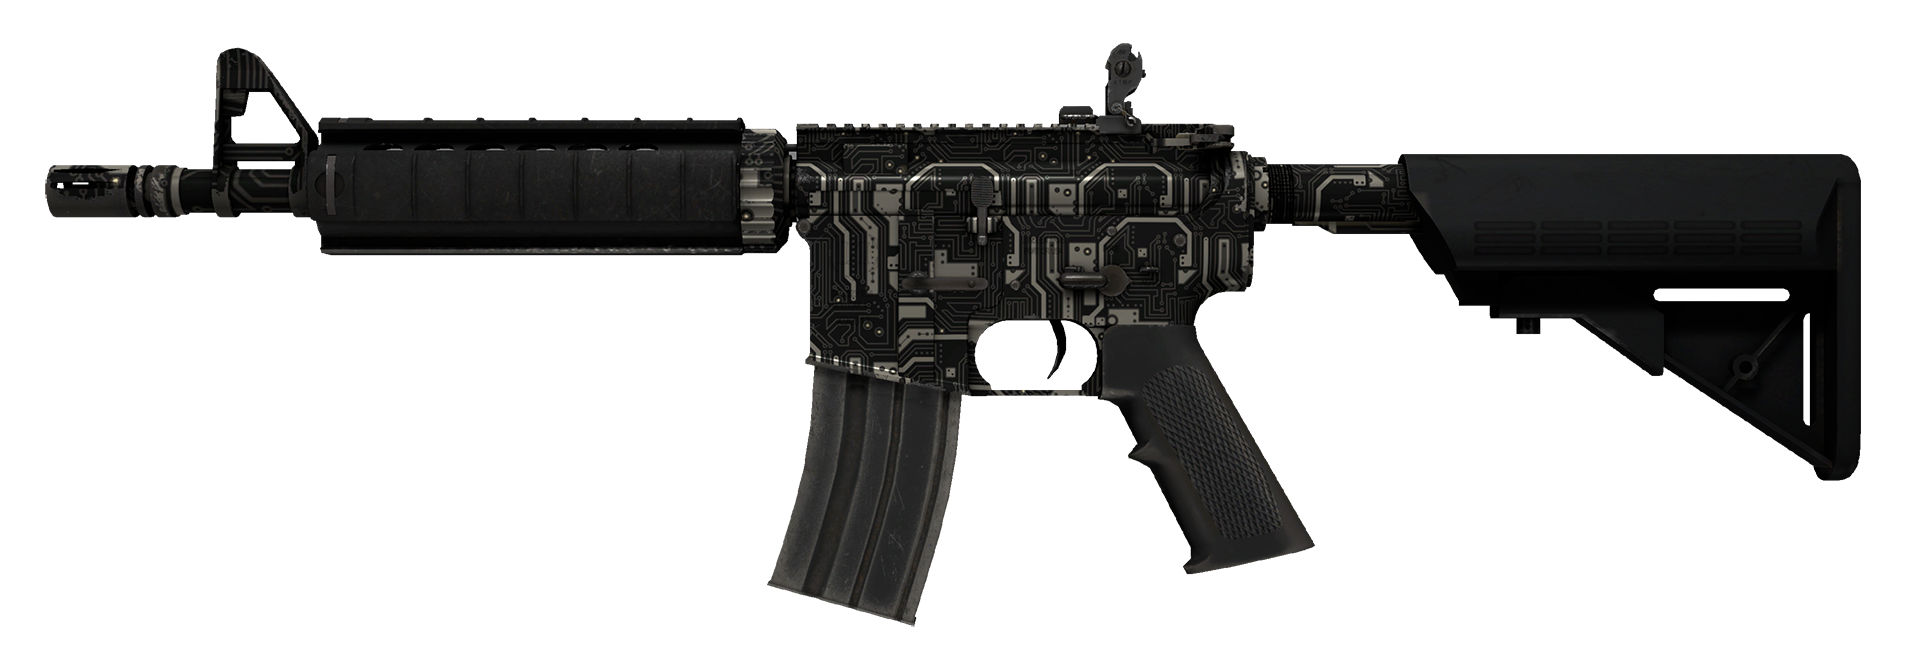 M4A4 Mainframe Large Rendering